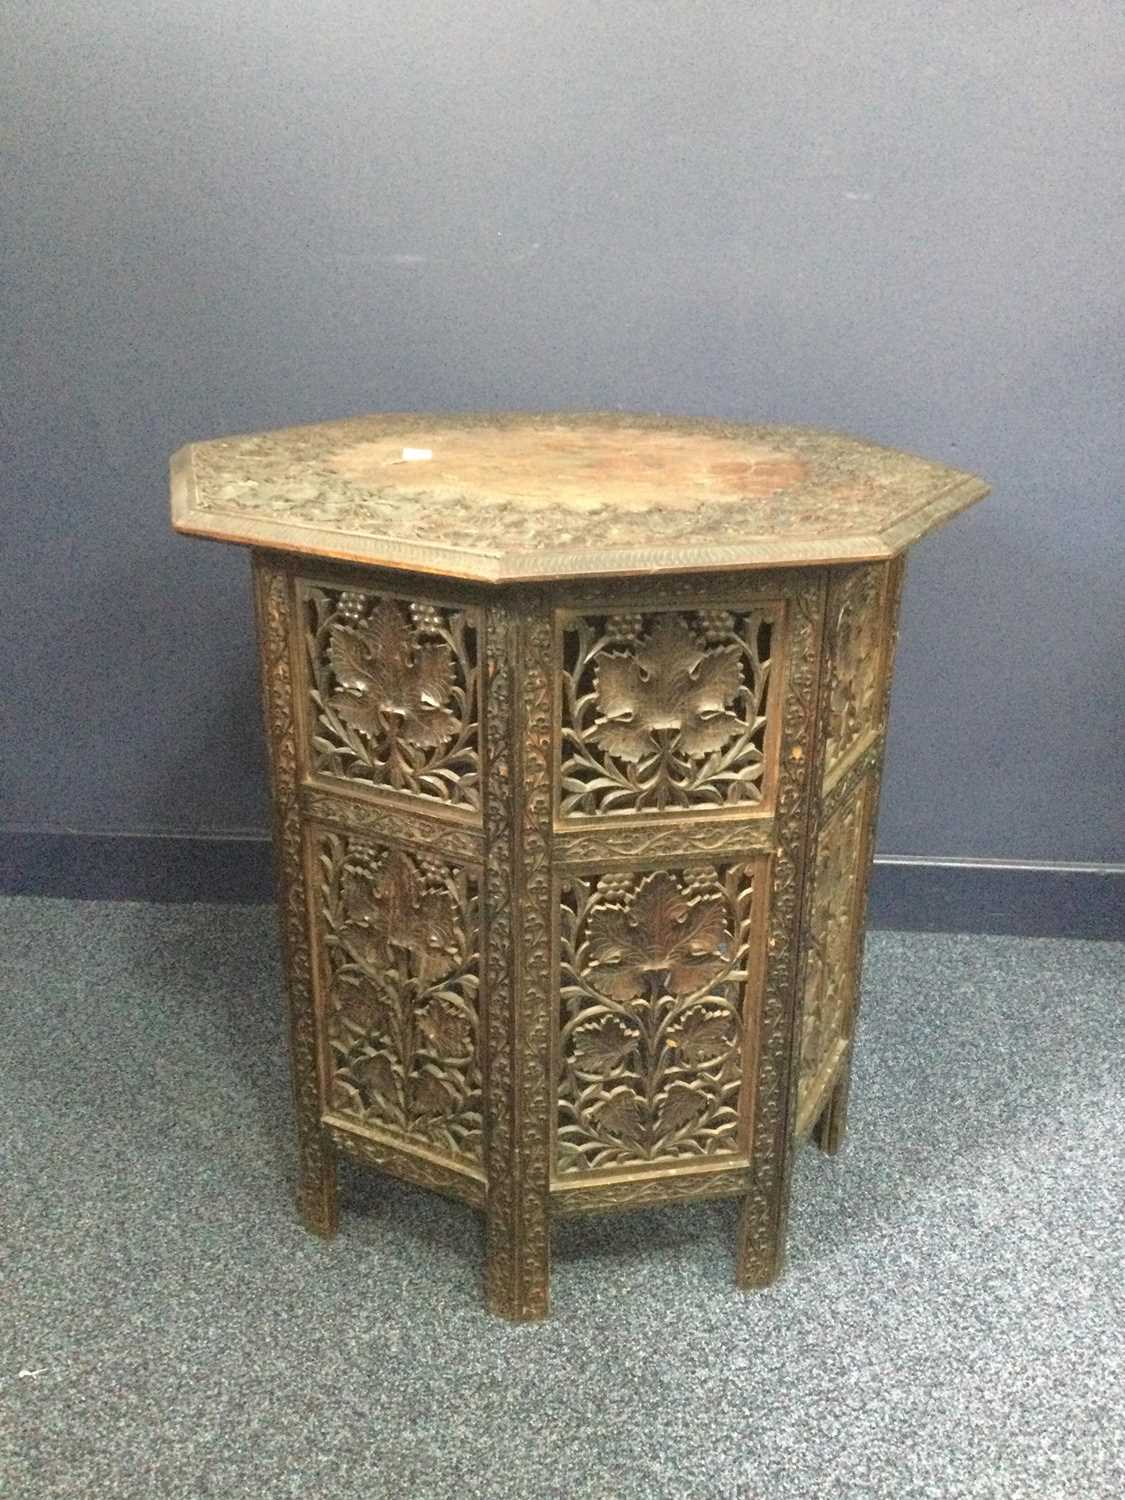 Lot 727 - AN INDIAN CARVED WOOD FOLDING TABLE